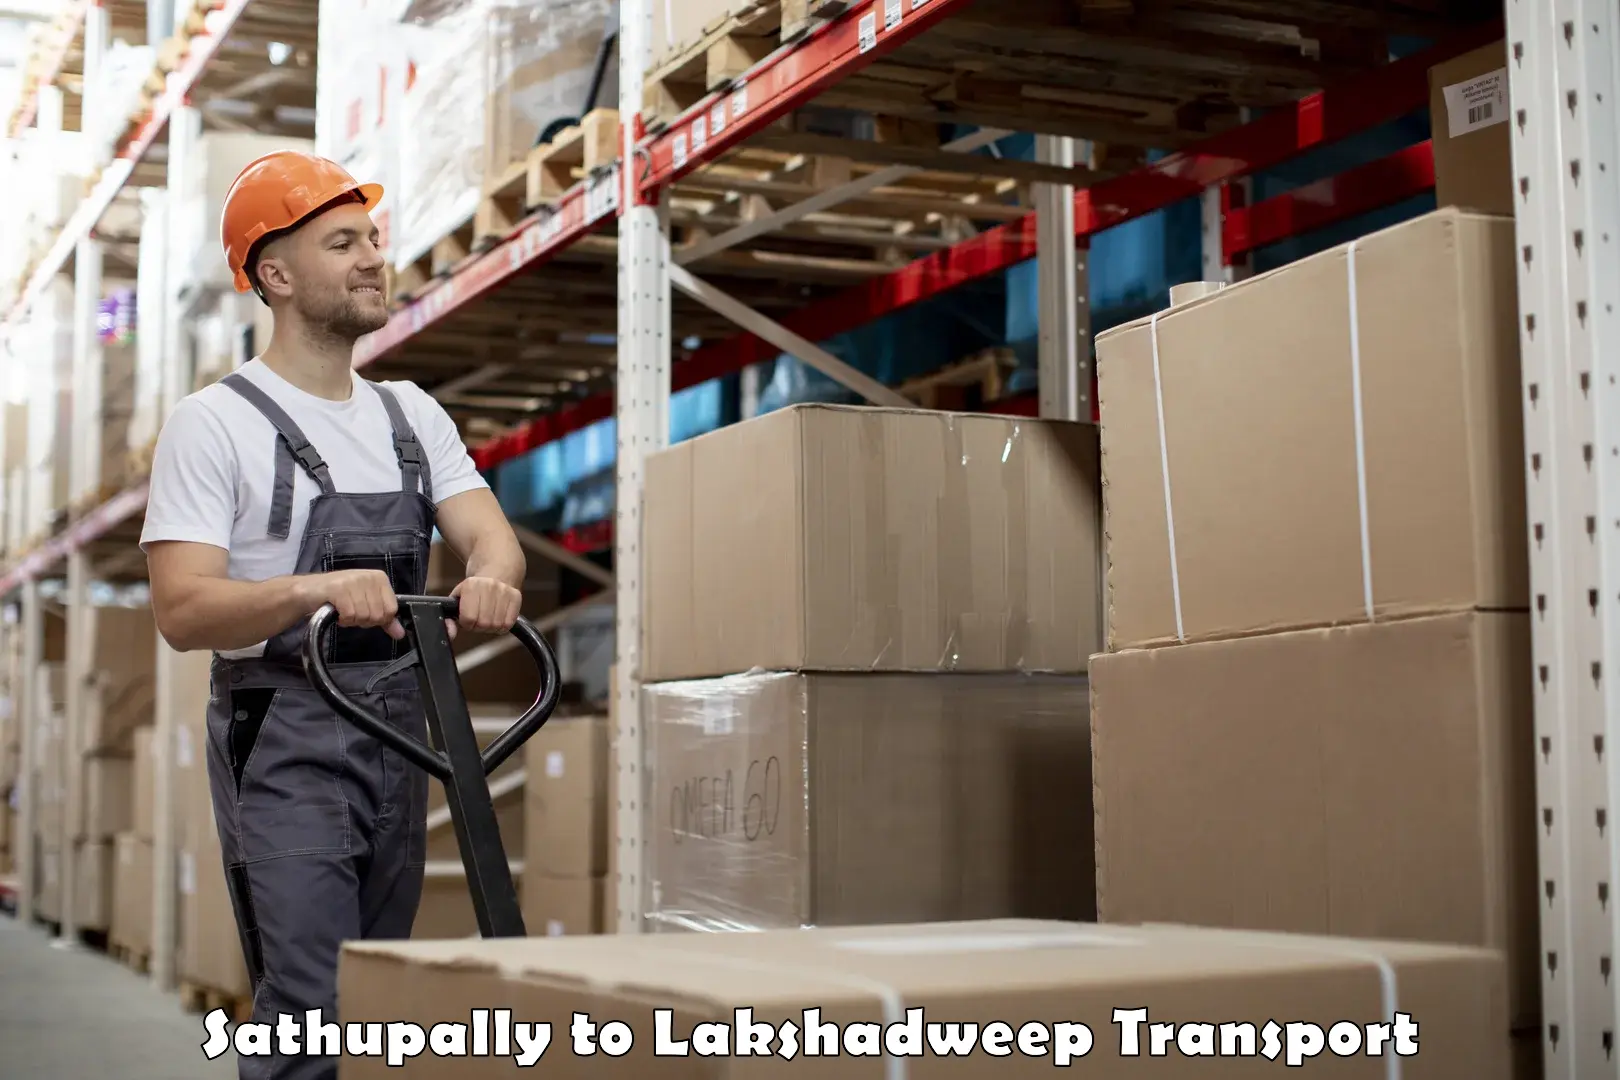 Road transport online services Sathupally to Lakshadweep